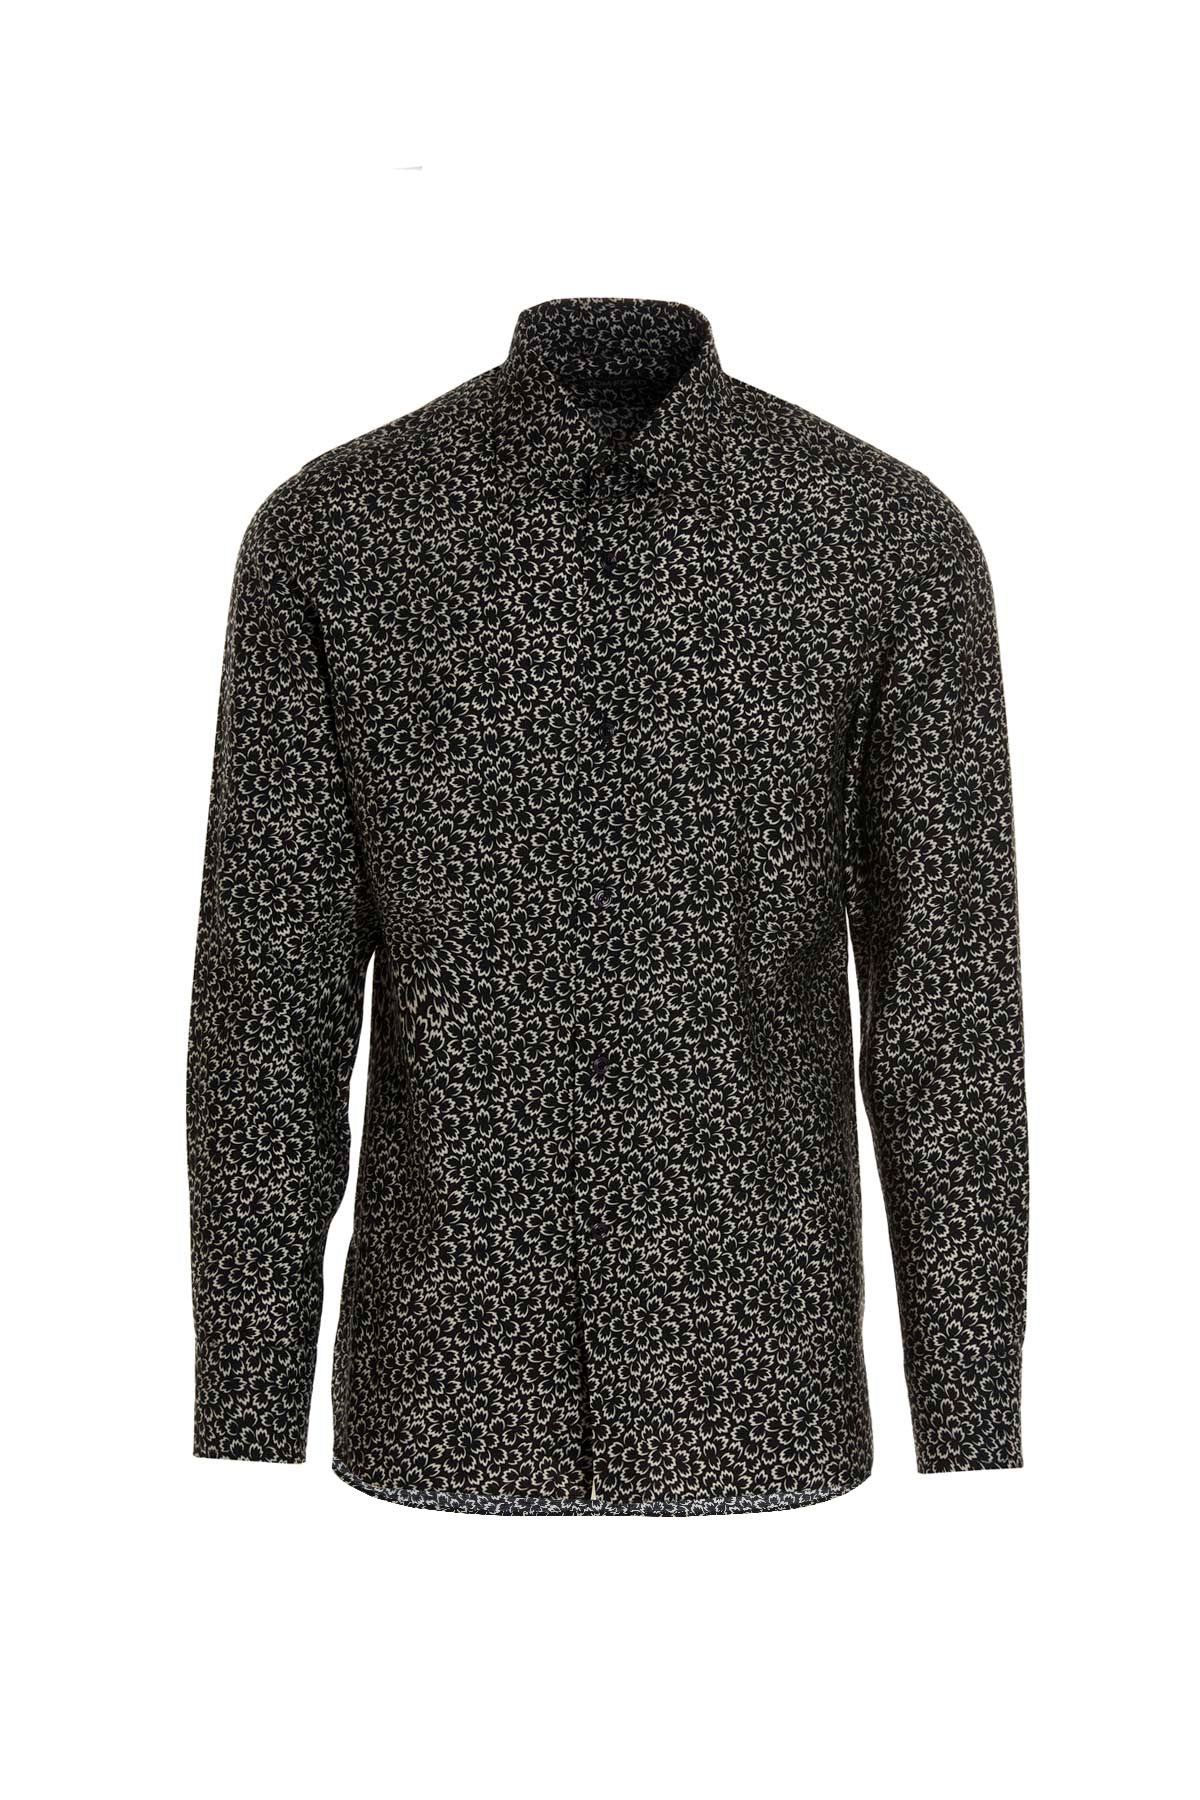 TOM FORD All Over Print Shirt